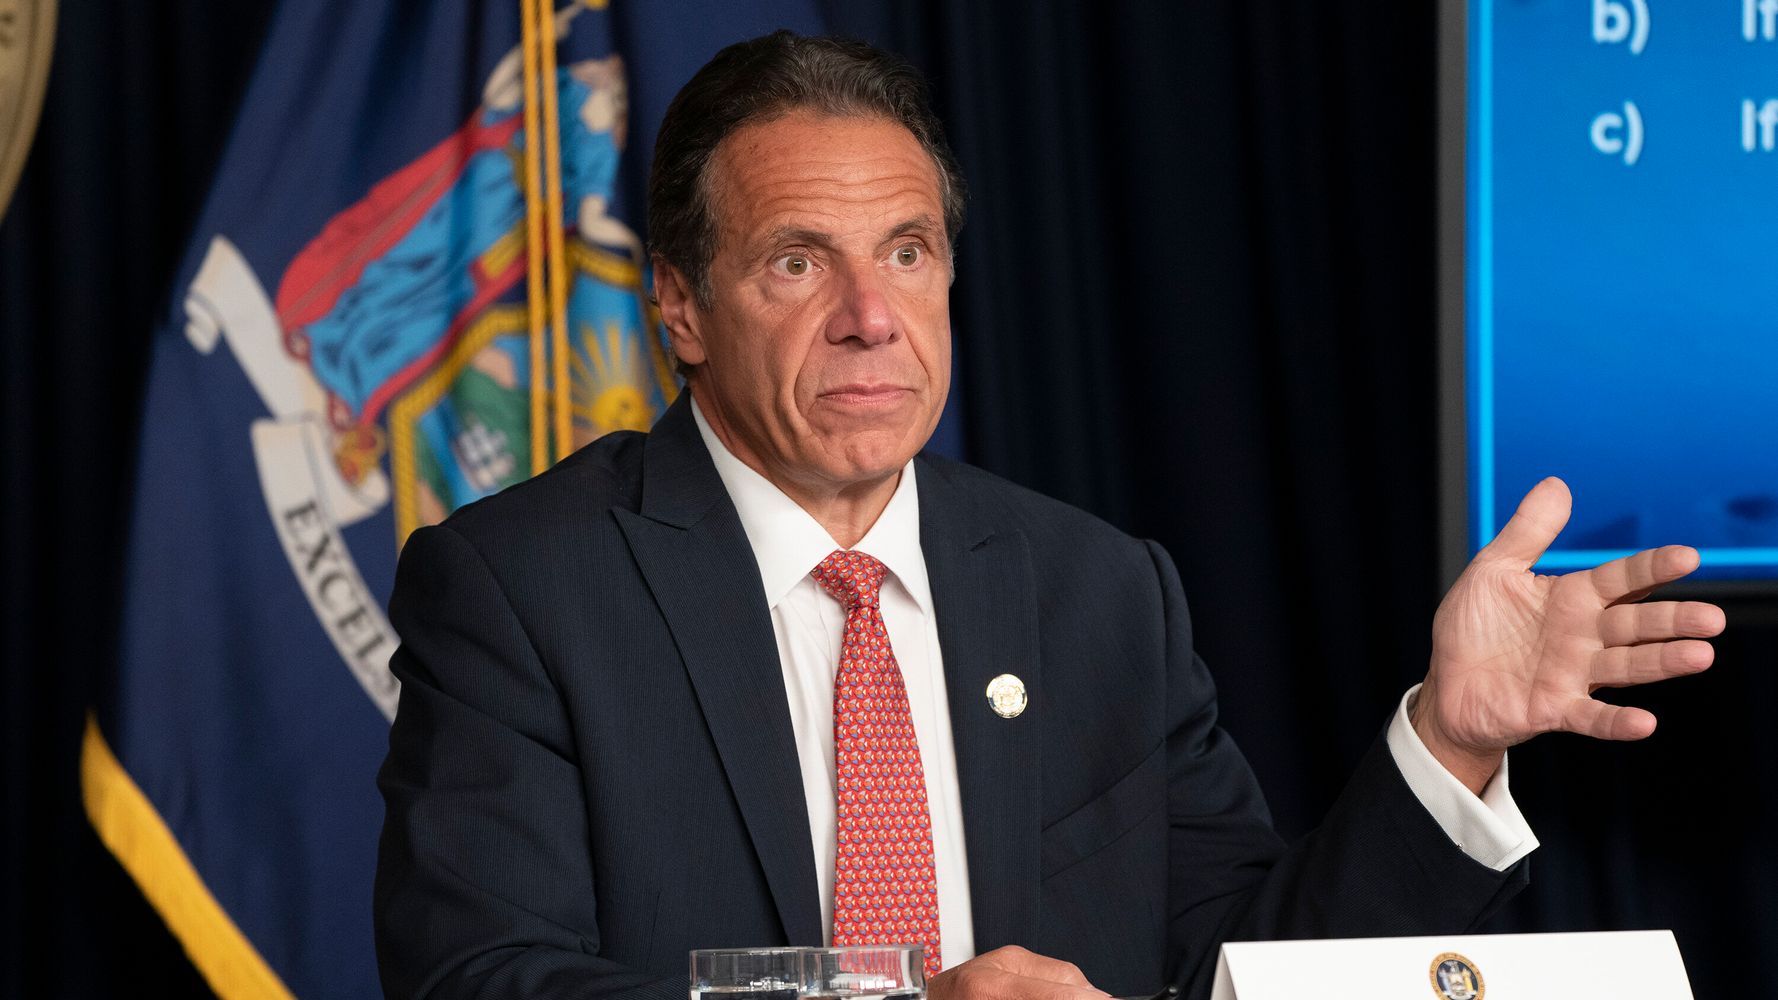 11 Hours Of Questioning For New York Gov. Andrew Cuomo In Harassment Inquiry